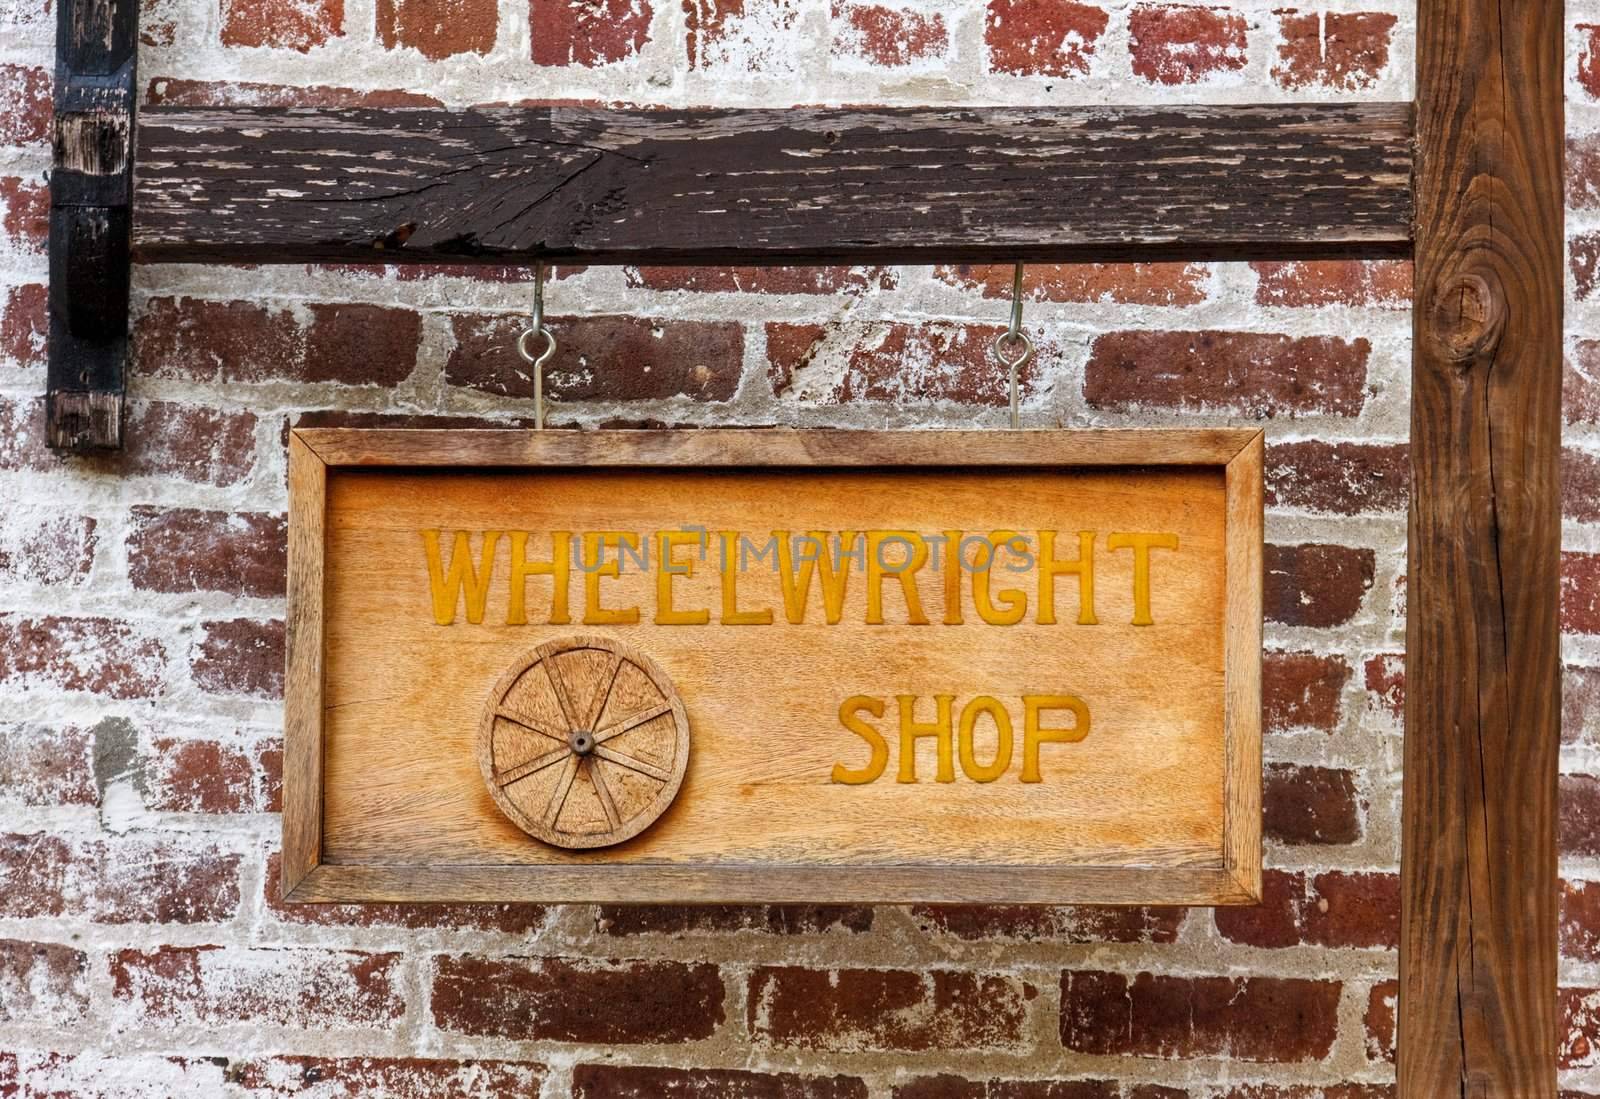 Wheelwright Shop Sign by sbonk